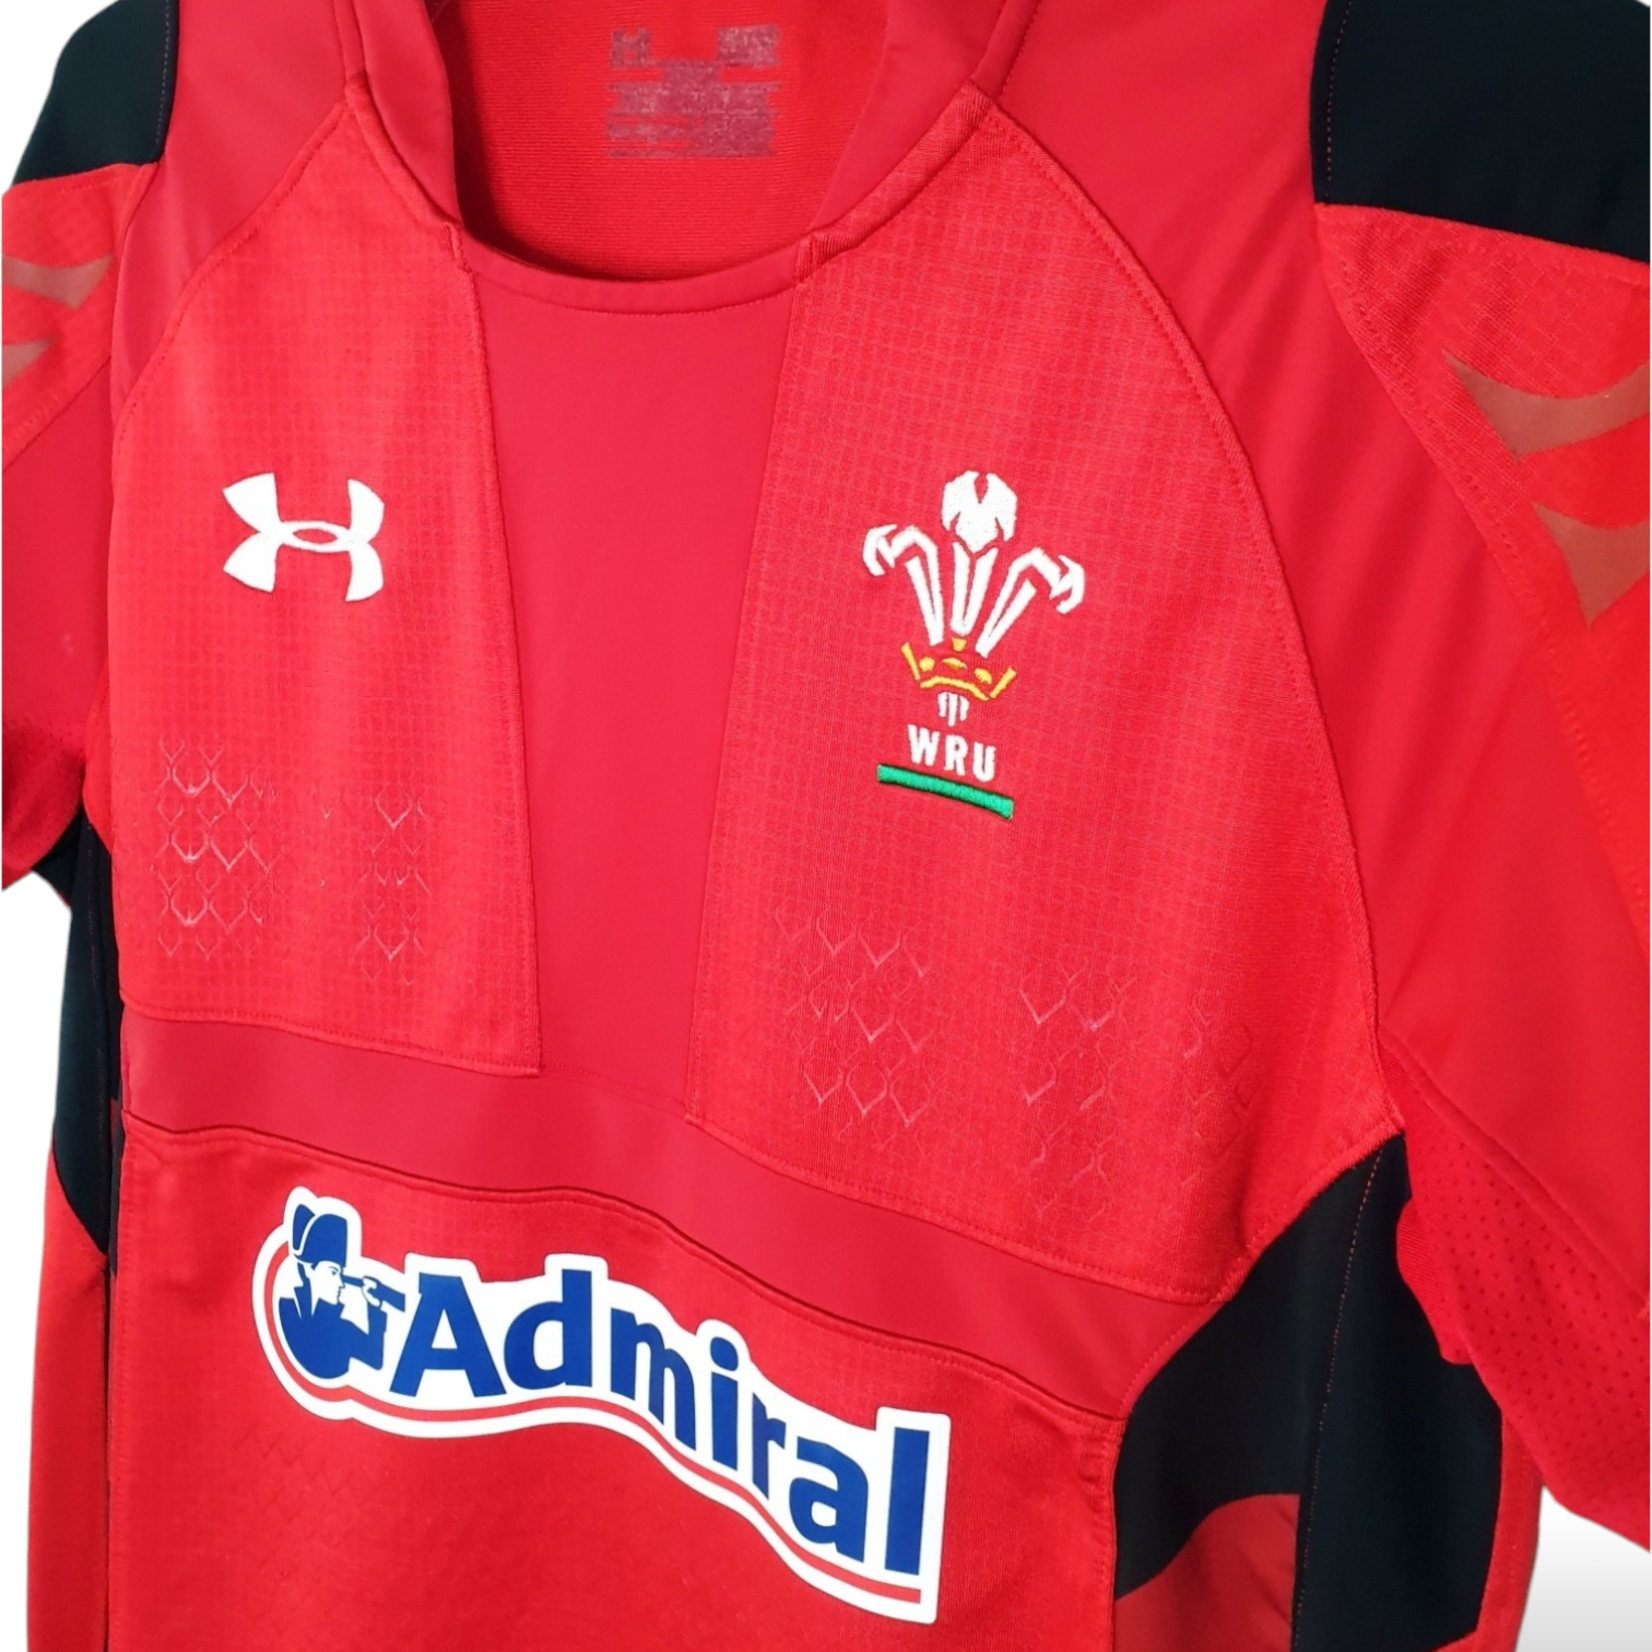 Under Armour Original Under Armour vintage rugby shirt Wales 2014/15